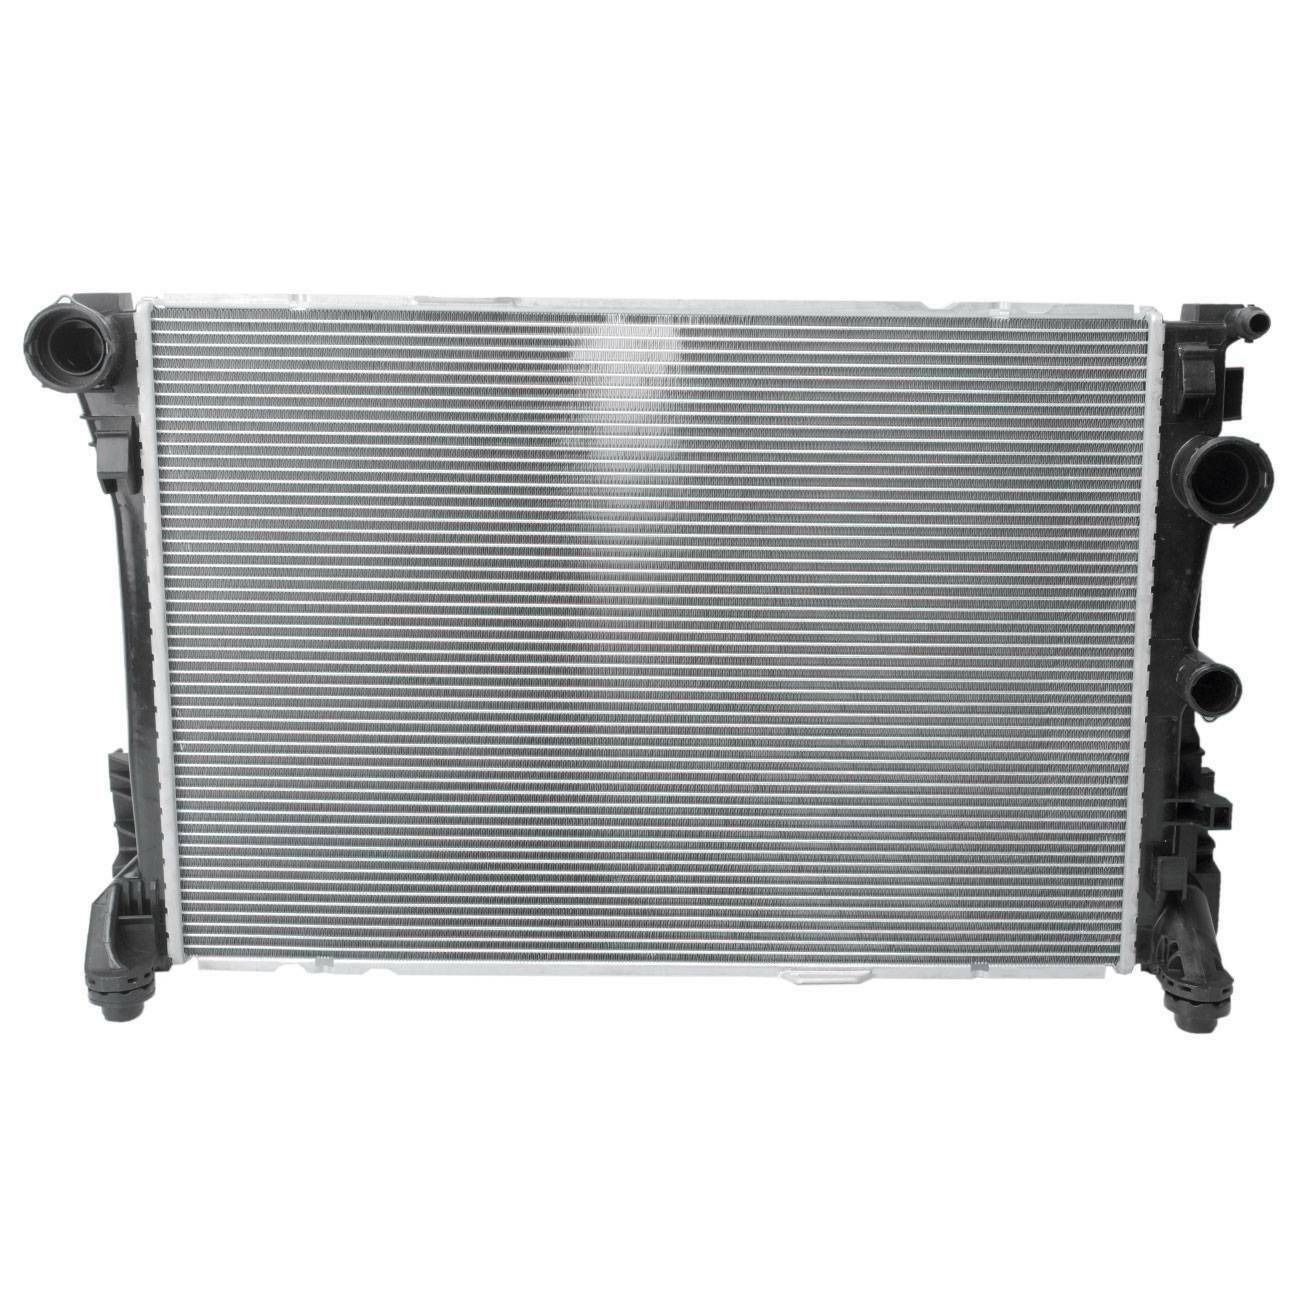 Engine Cooling Radiator for Mercedes W204 W212 C207 A207 R172 A0995006203 German Made